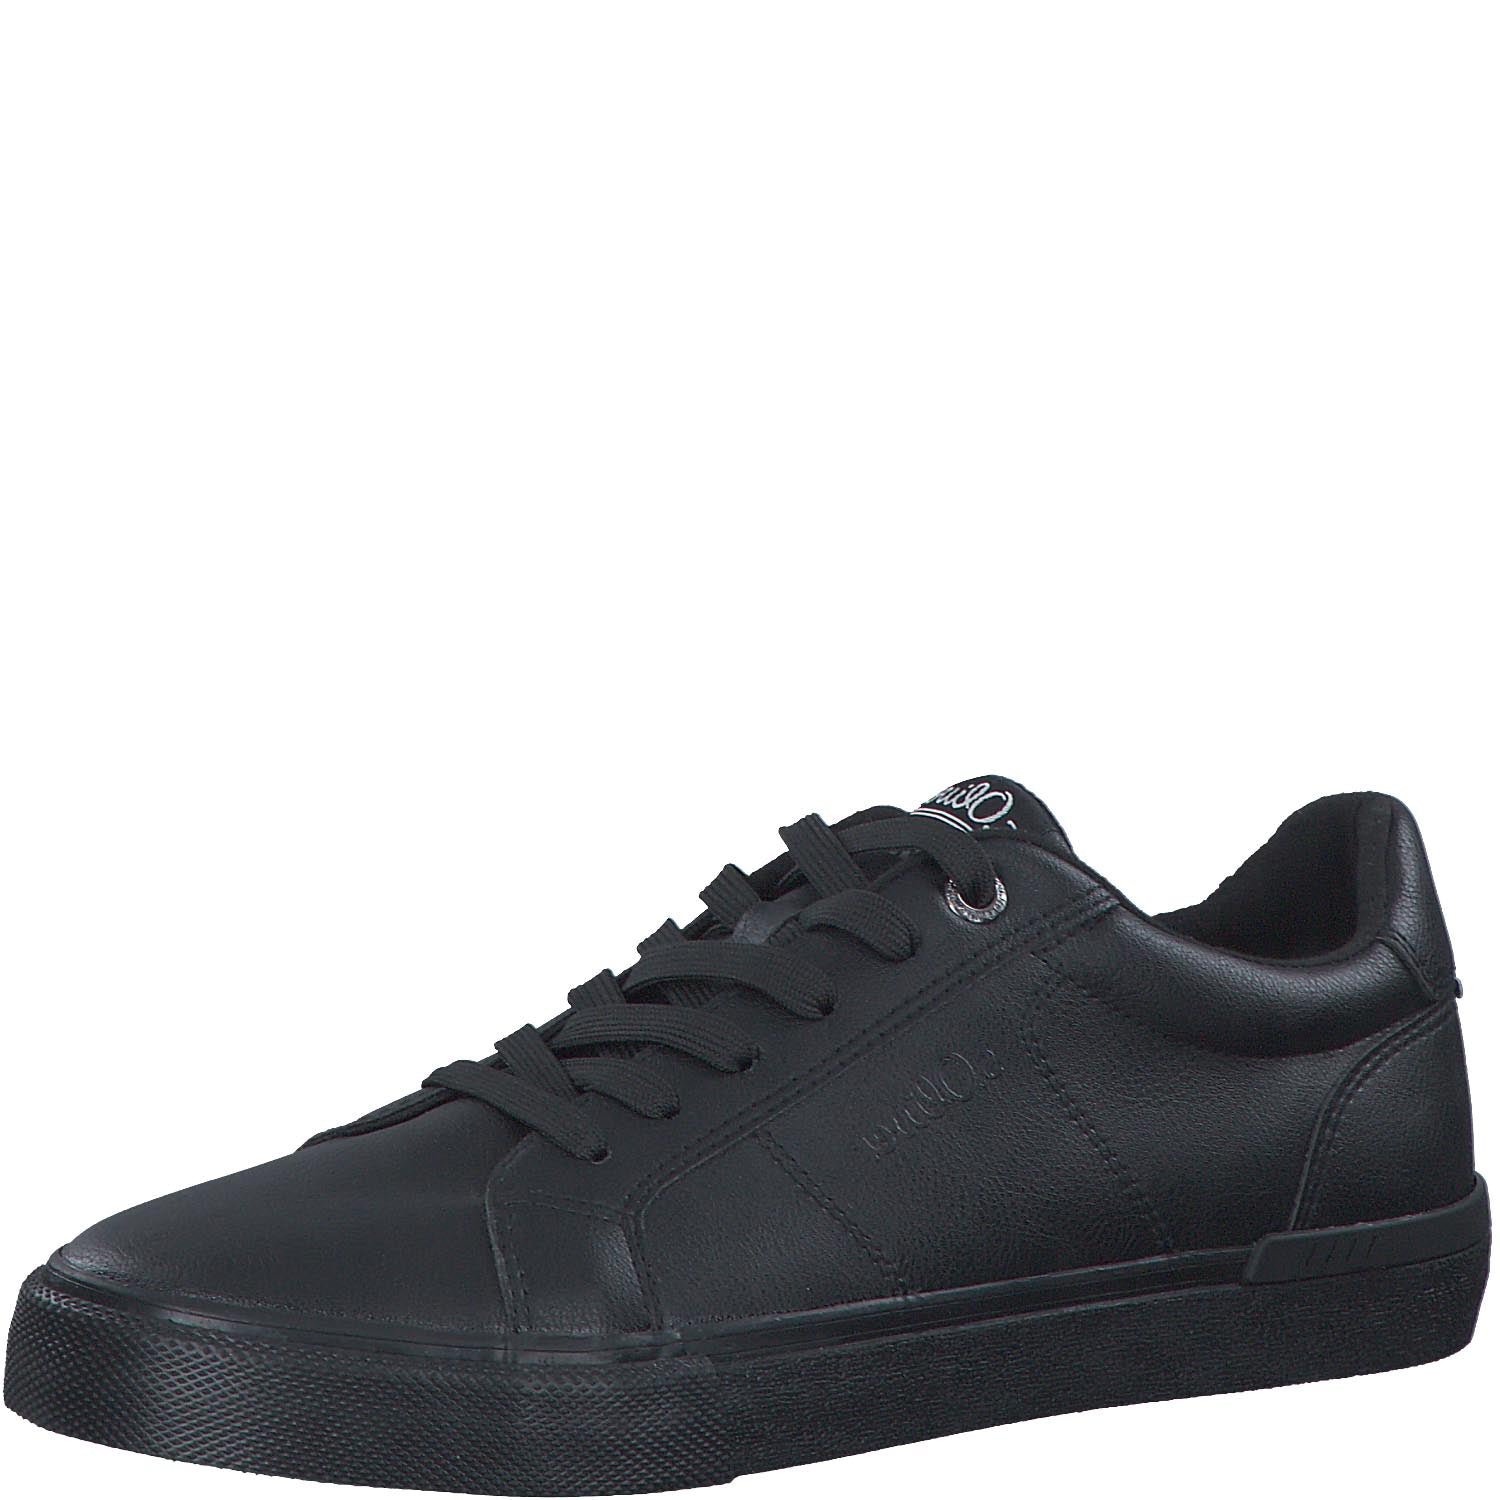 Men's Faux Leather Sneakers with Soft Foam Sole